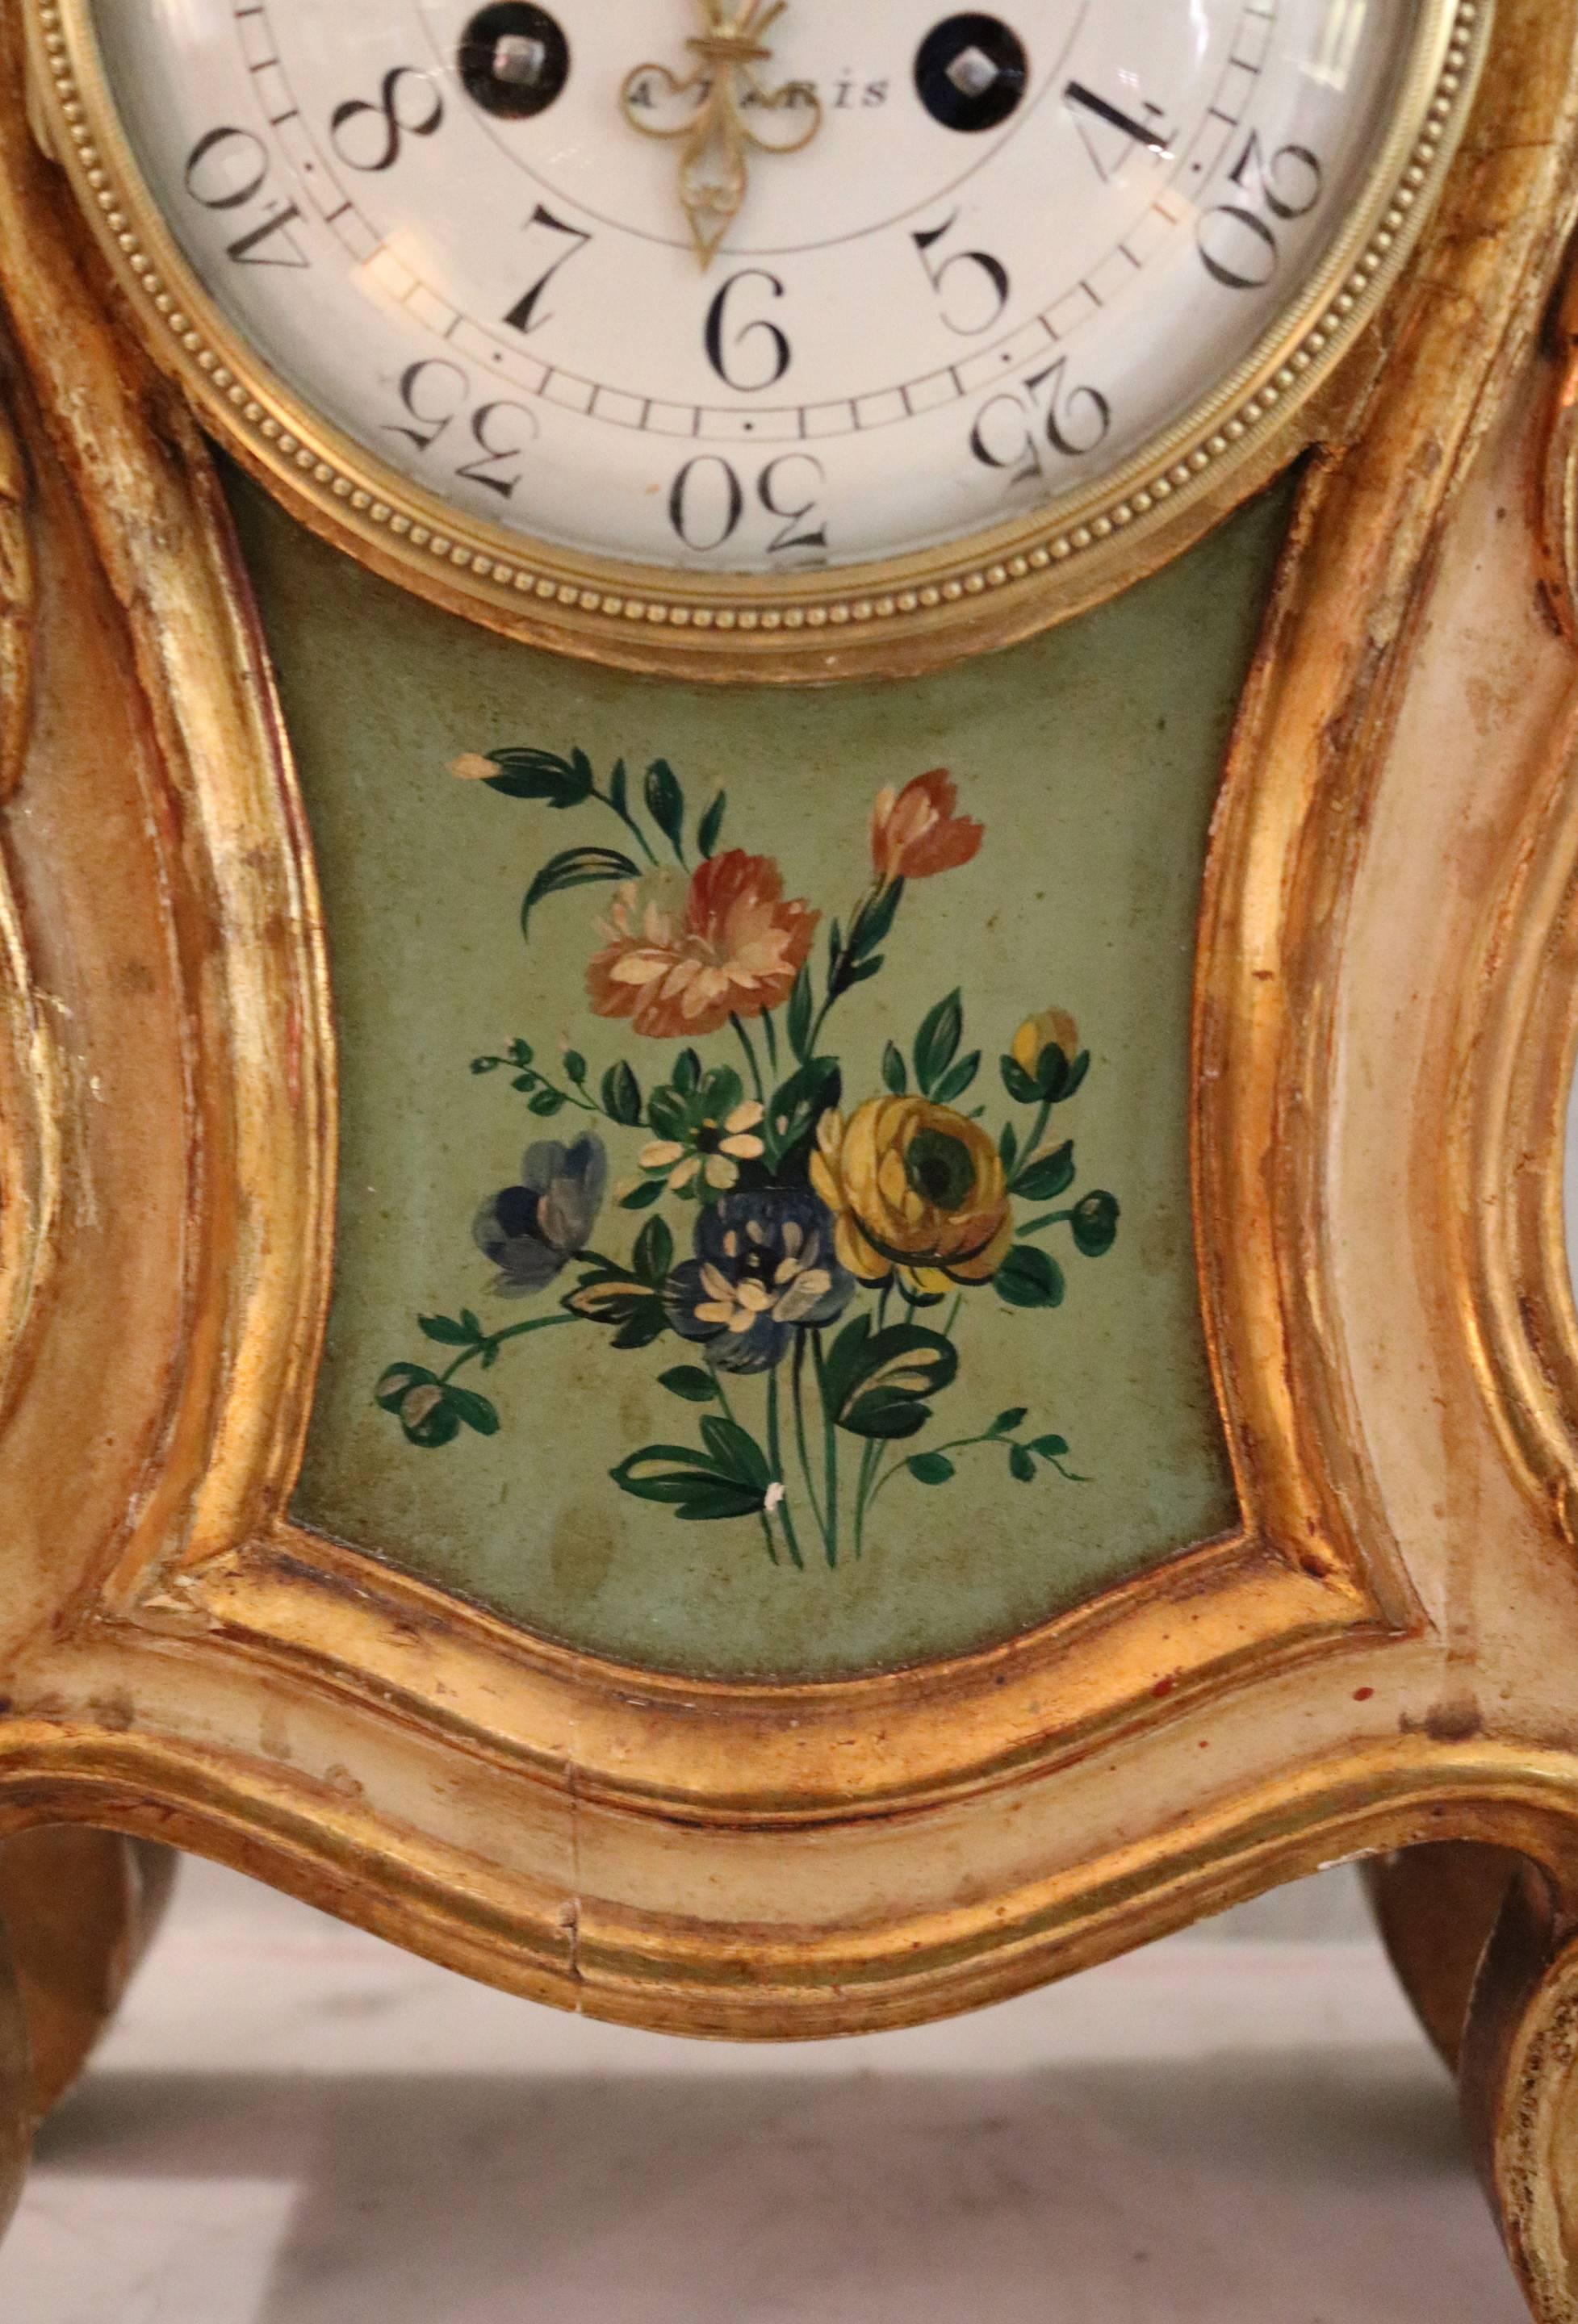 An imposing carved giltwood and painted mantel clock in the Louis XV style, made circa 1900. It has a waisted case, with a carved ribbon and acanthus swag above the dial, and a painted floral panel below with matching sides. The enamel dial has a